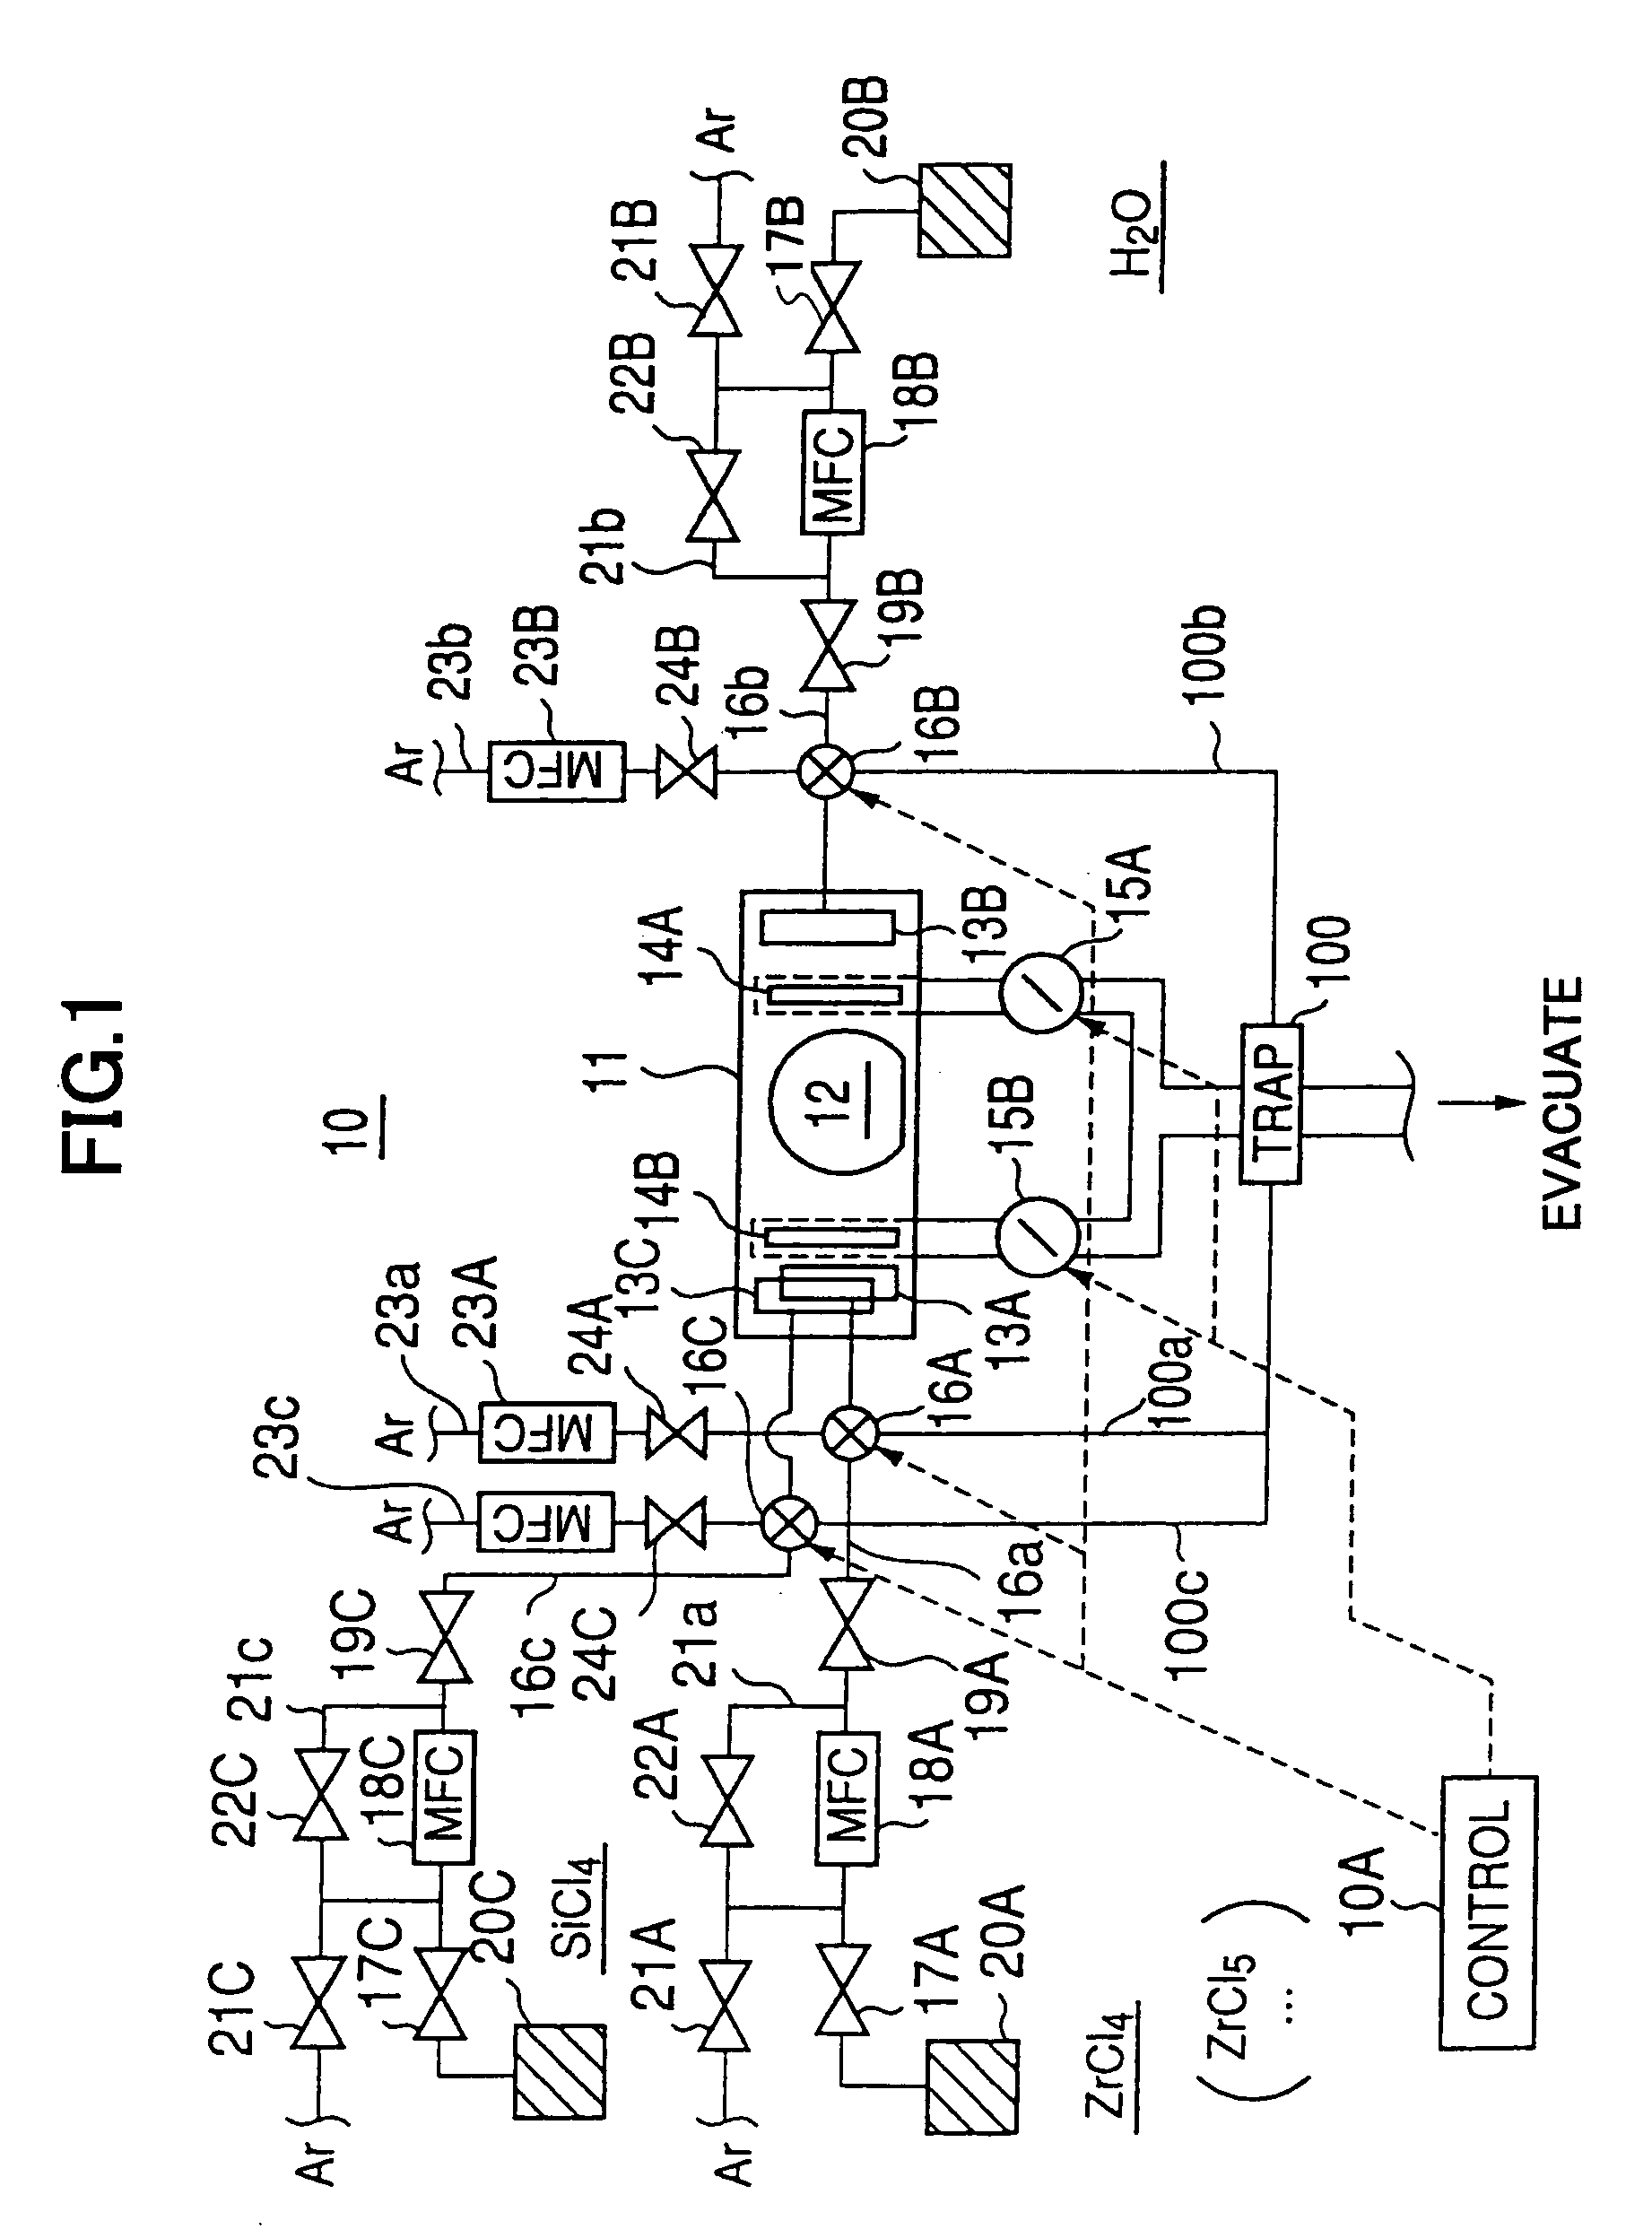 Substrate processing apparatus and method, high speed rotary valve and cleaning method